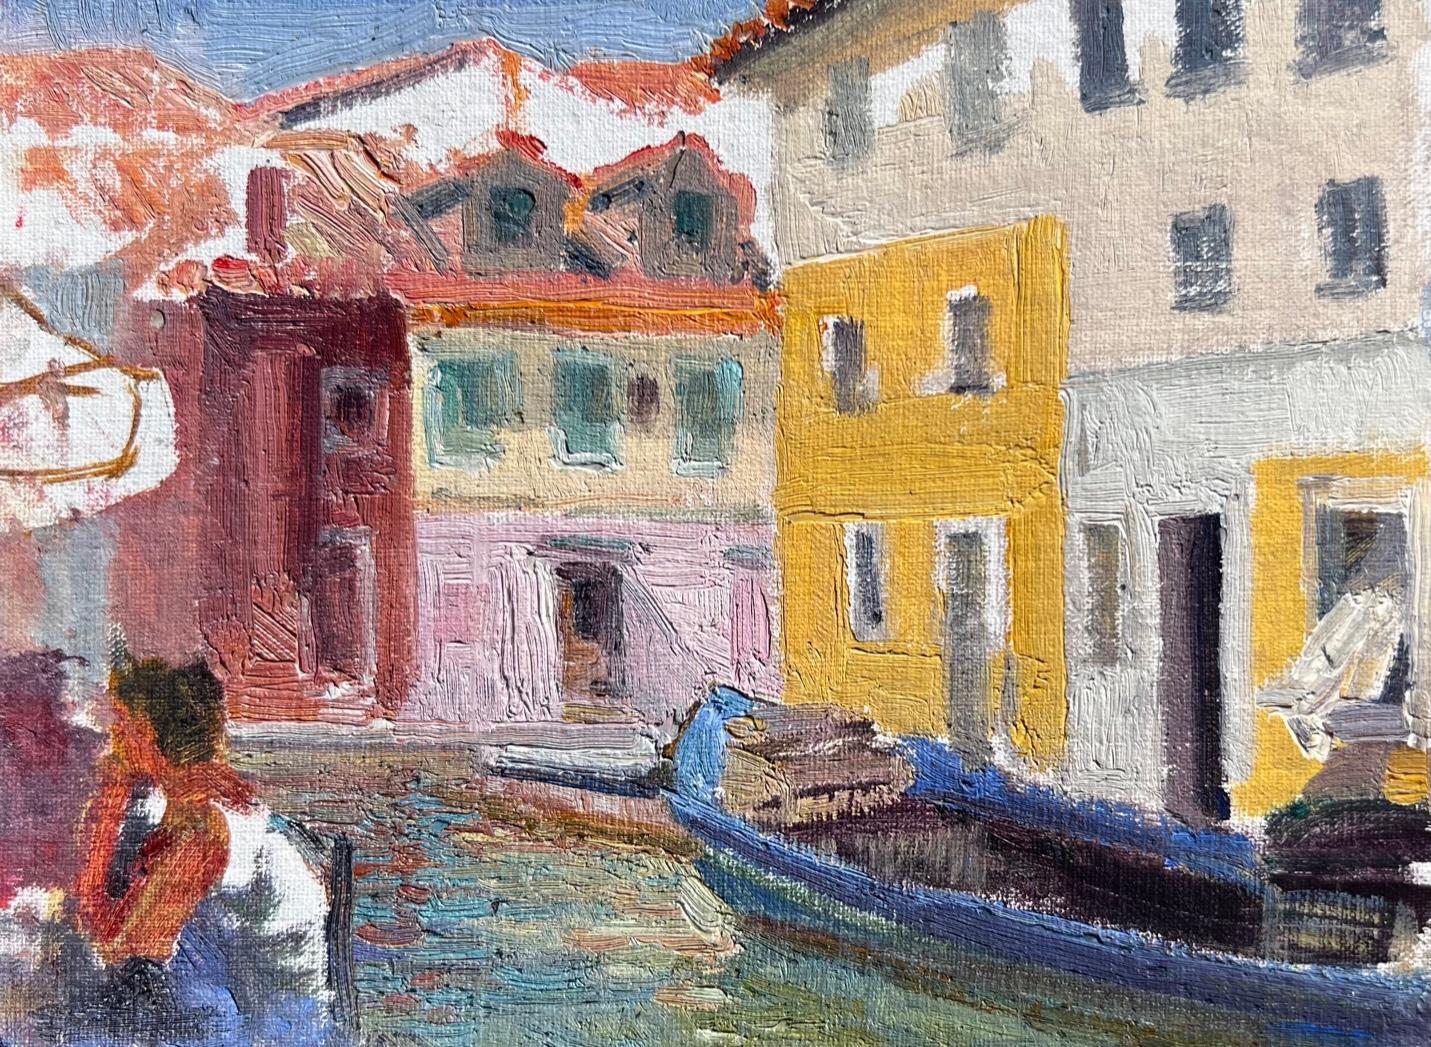 Basilica Santa Croce is part of newly released small works from V....Vaughan's collection of recent travels in Italy and France. V....Vaughan painted each of these  in plein aire  on sight. Santa Croce has always played a major role in the religious